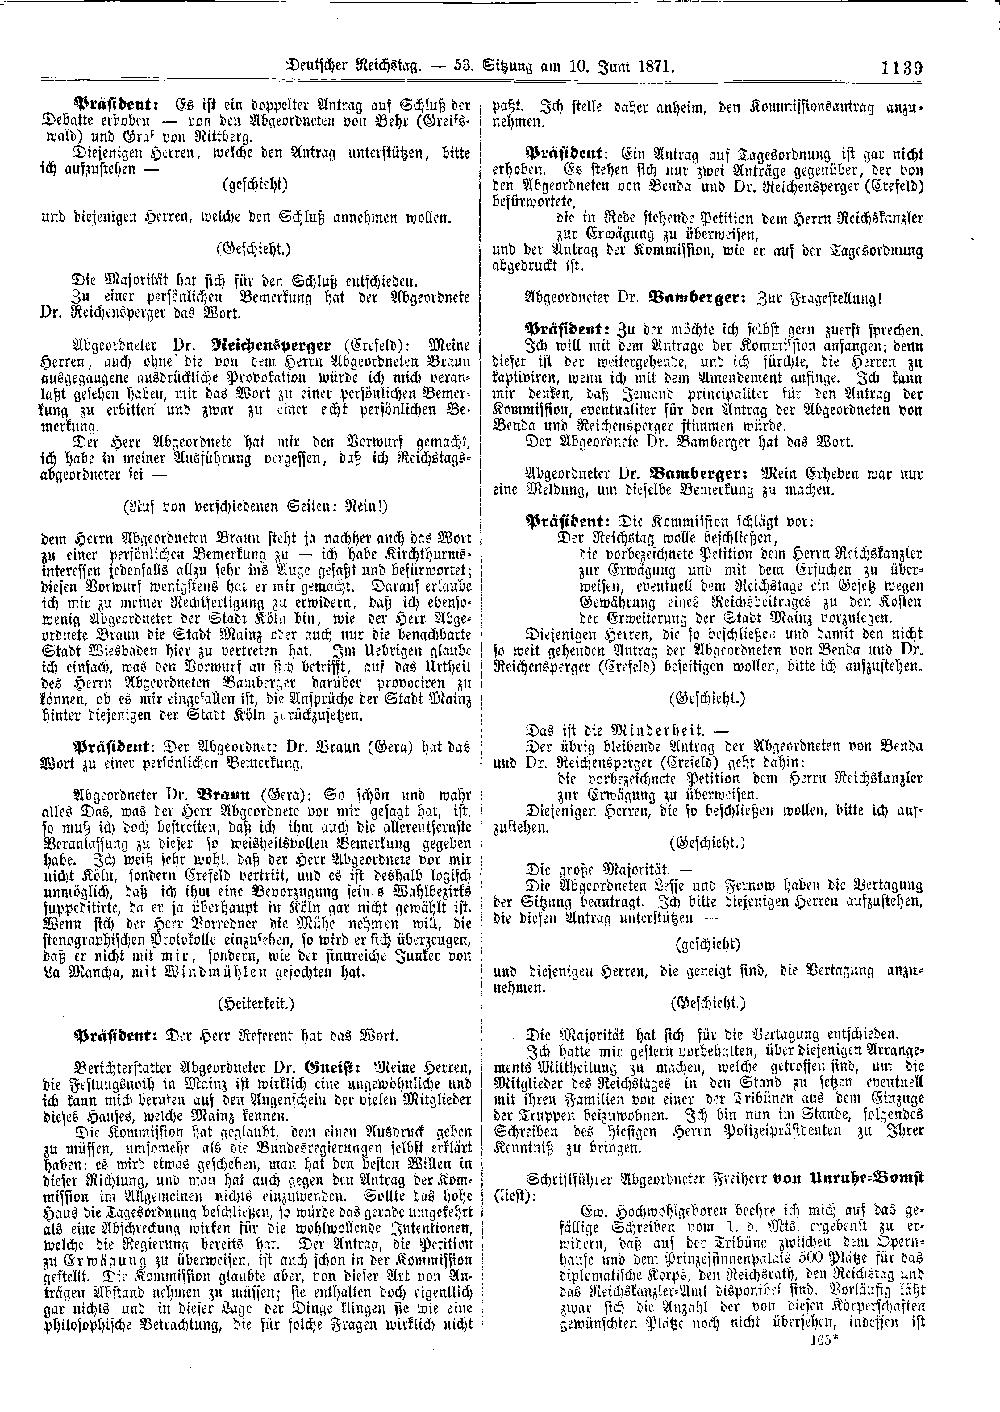 Scan of page 1139